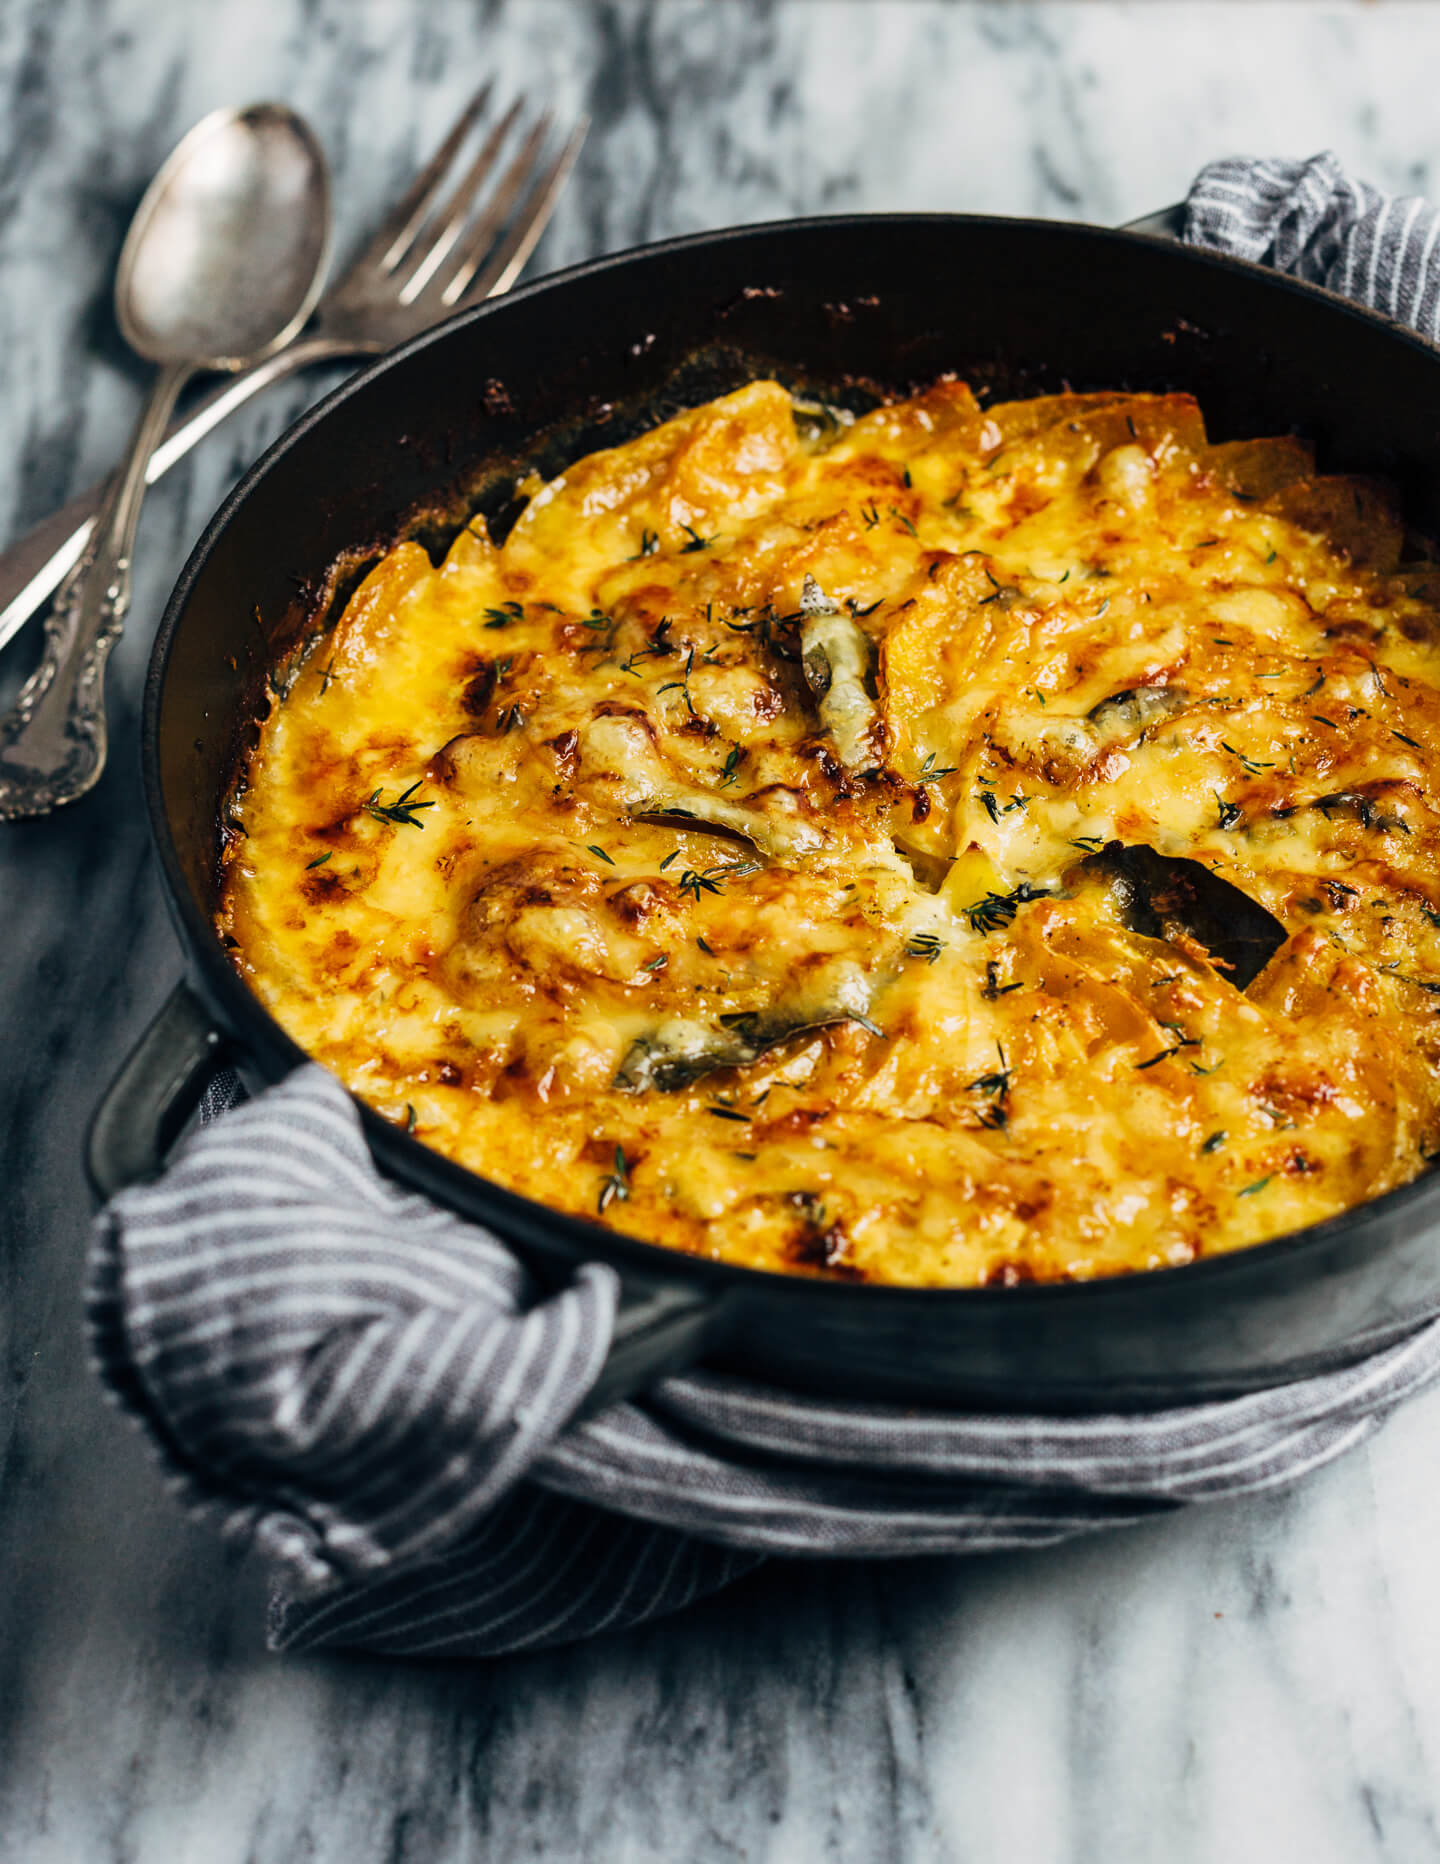 An autumnal butternut squash gratin made with a mix of Emmentaler and Gruyere cheeses, fresh thyme, and bay leaves. This hearty gratin is perfect as part of a cozy fall supper or as a Thanksgiving side.